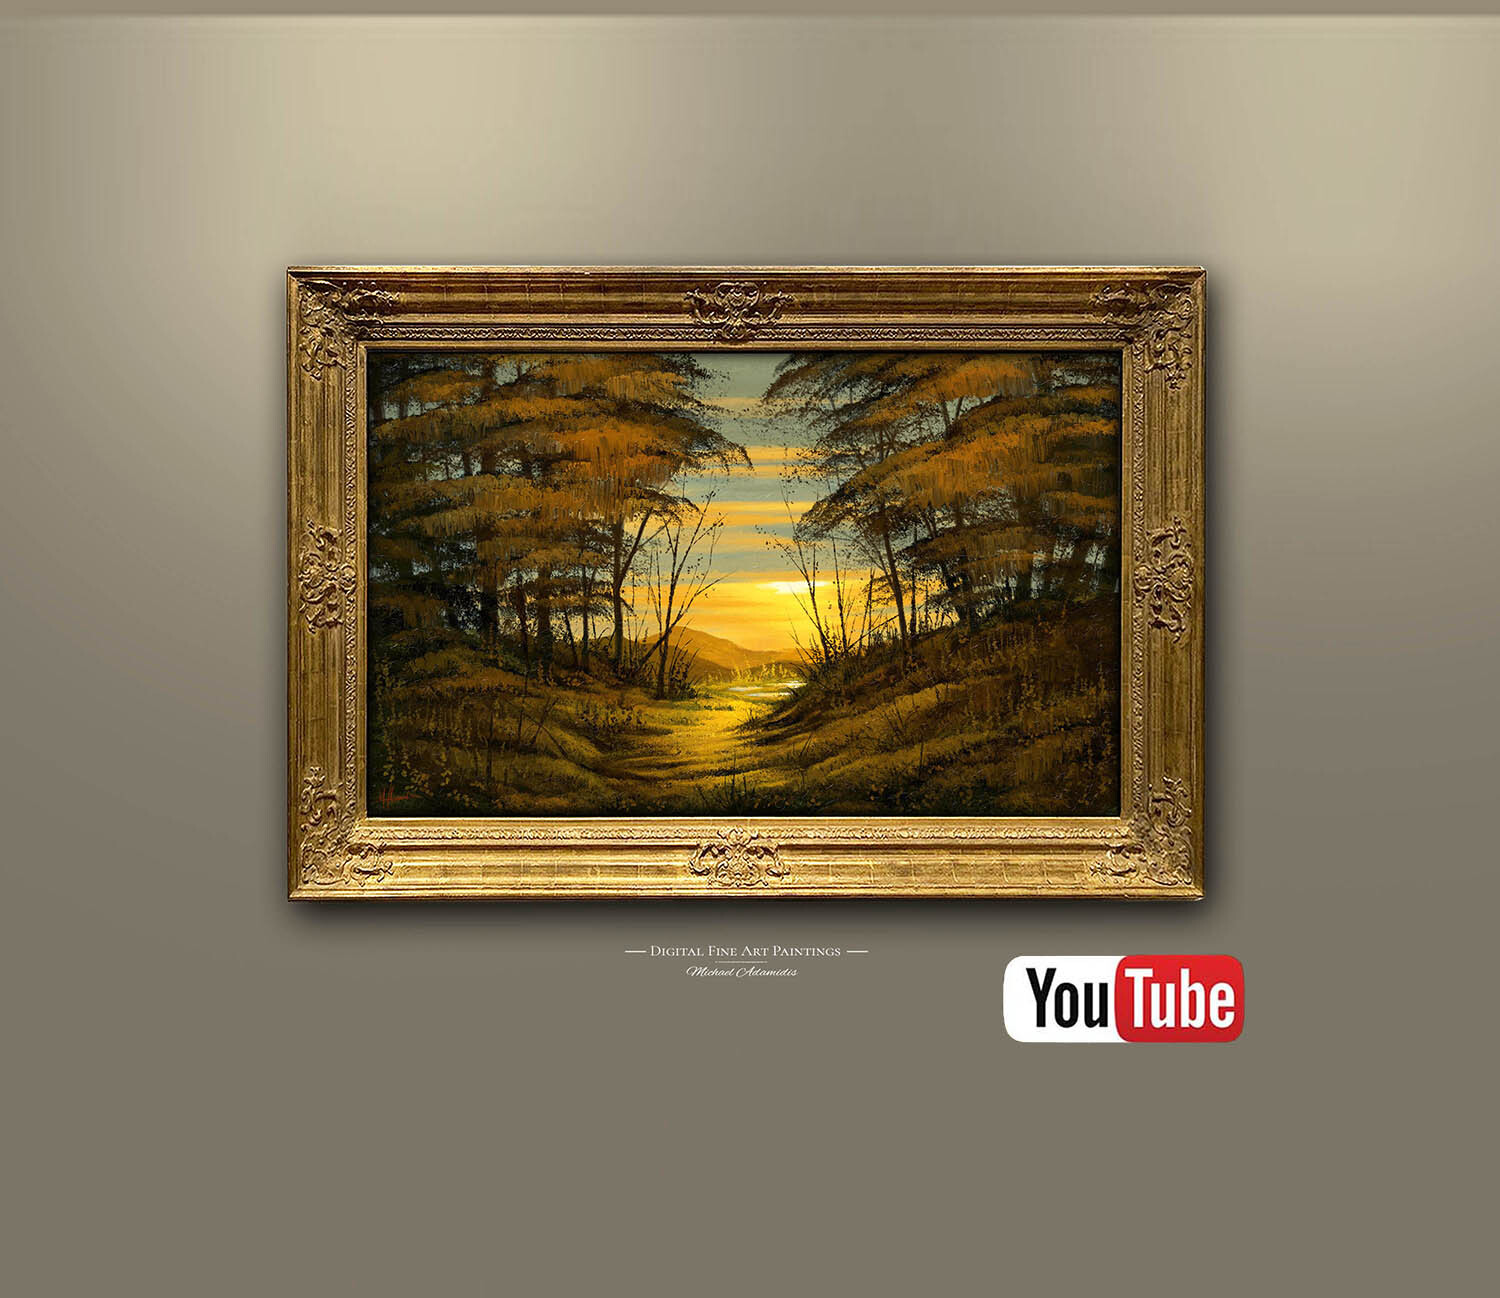 How to Paint digitally a traditional Landscape Painting - FREE! Tutorial (pt 2.)